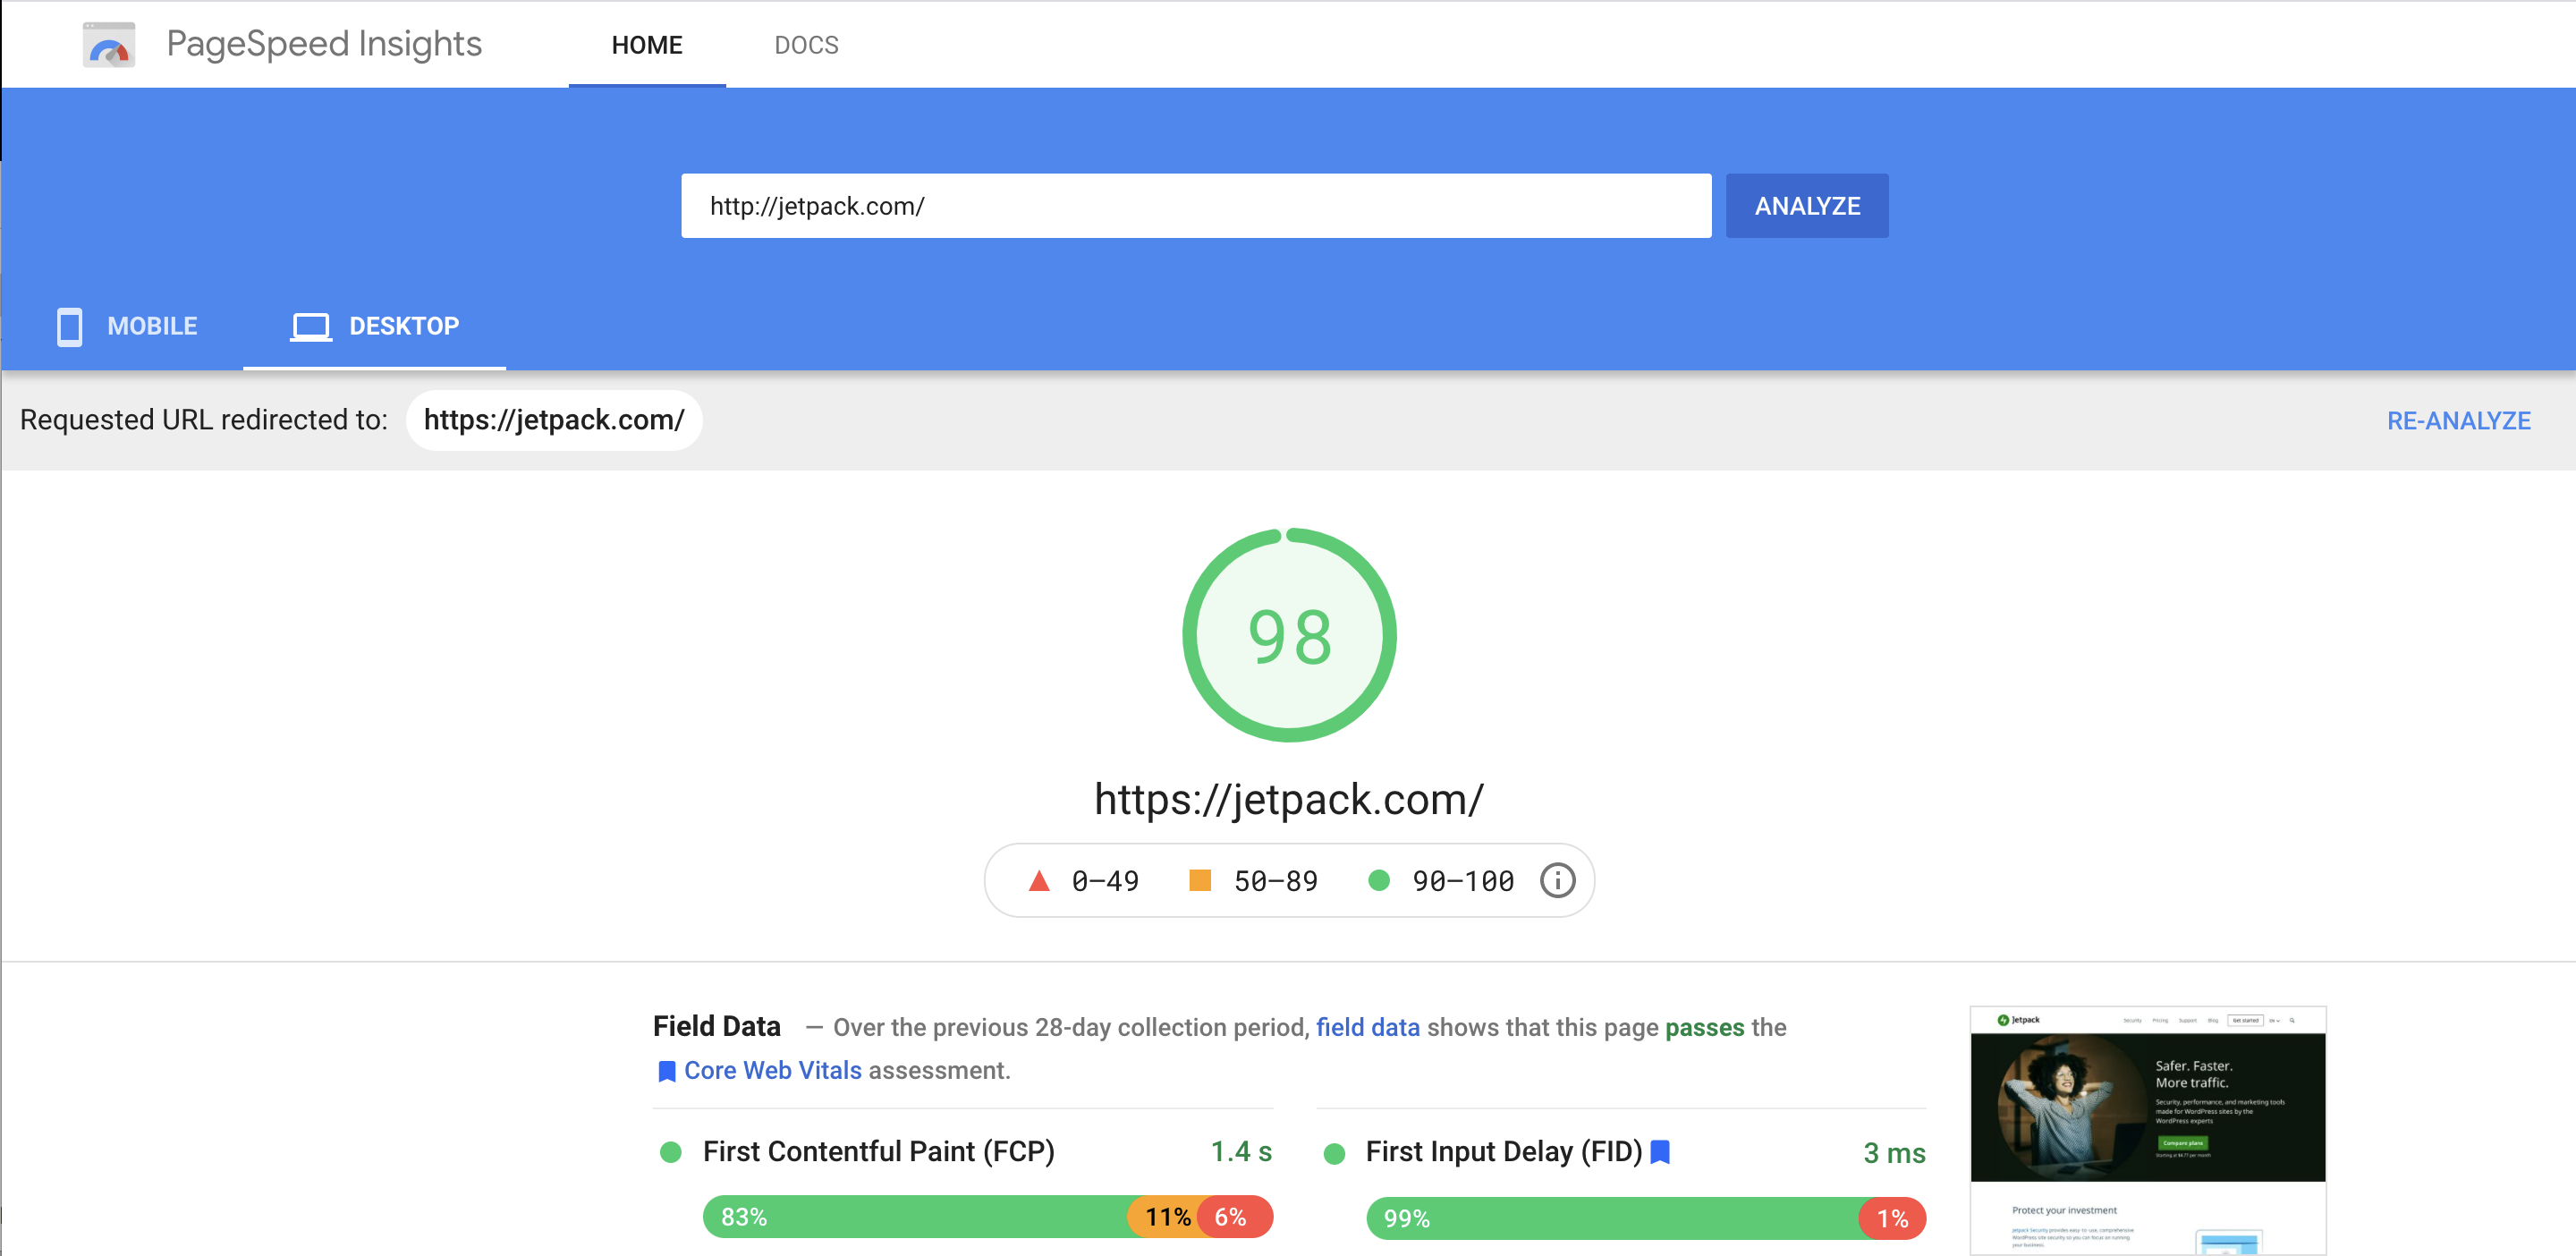 Google PageSpeed report for Jetpack.com